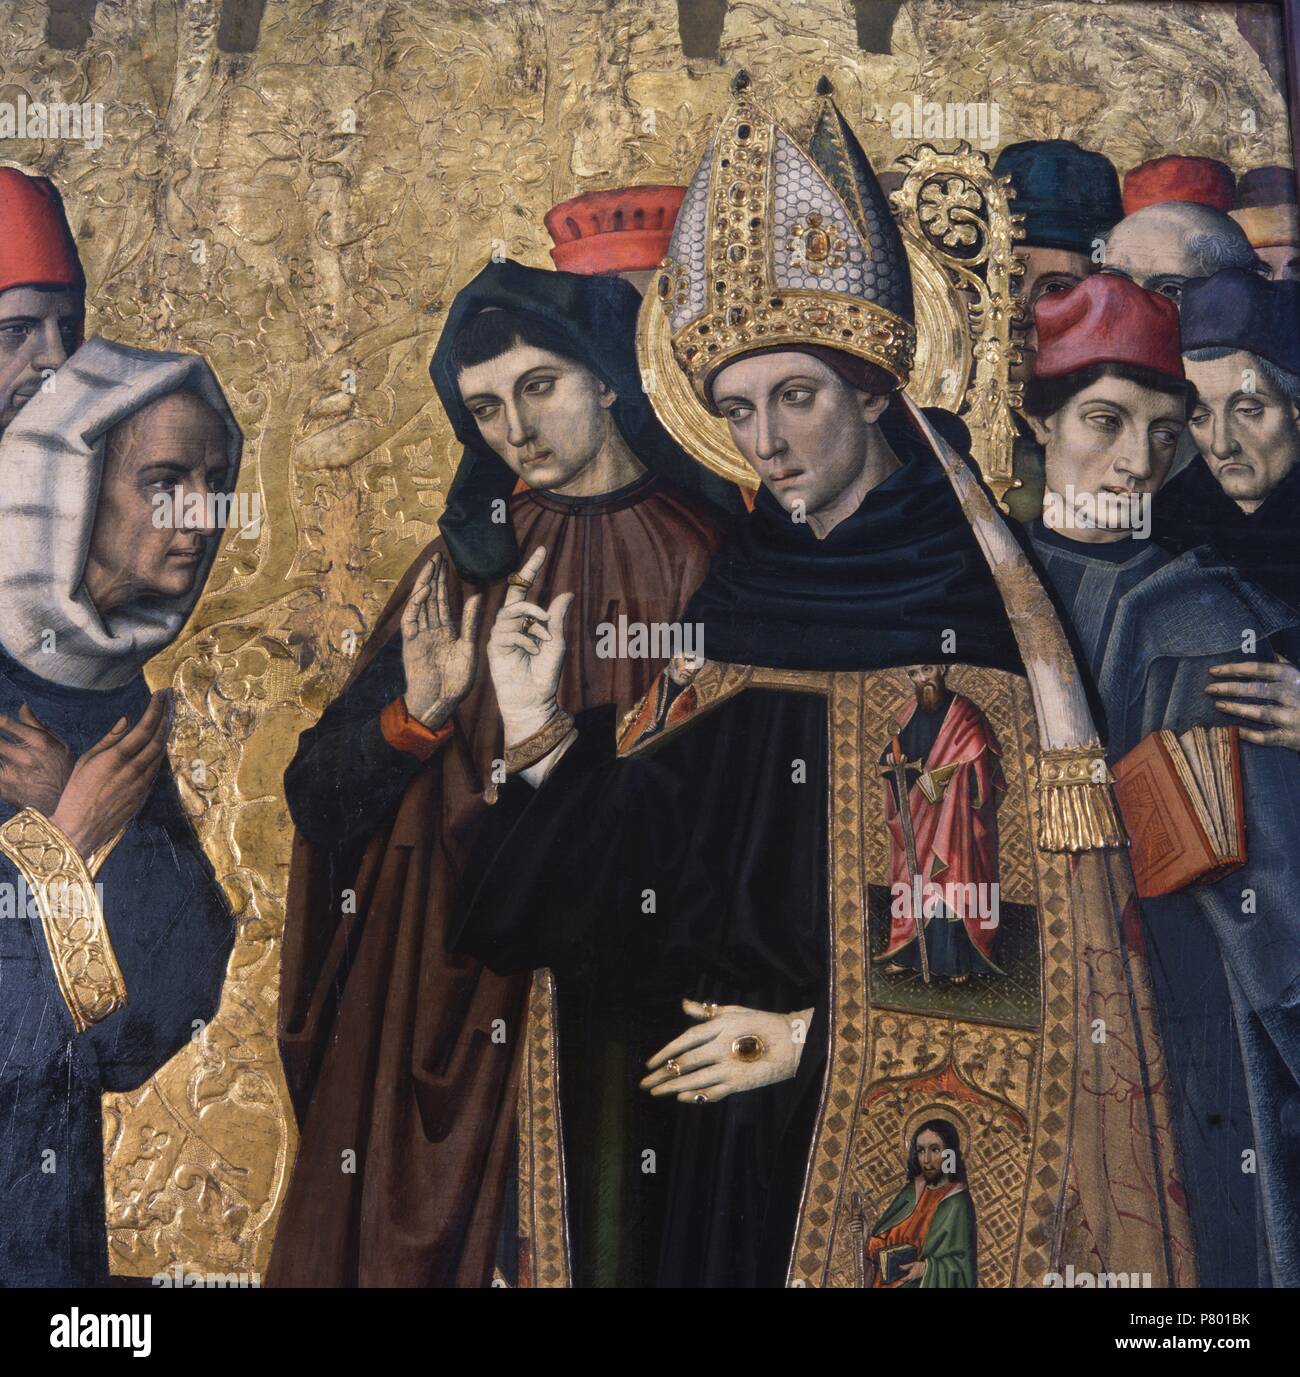 Saint Augustine Disputing with the Heretics, circa 1470/1475-1486.  Tempera, stucco reliefs and gold leaf on wood. 264 x 196.5 x 7.5 cm. It comes from the high altar of the church of the convent of Sant Agustí Vell, Barcelona. Museu Nacional d'Art de Catalunya, Barcelona. Stock Photo